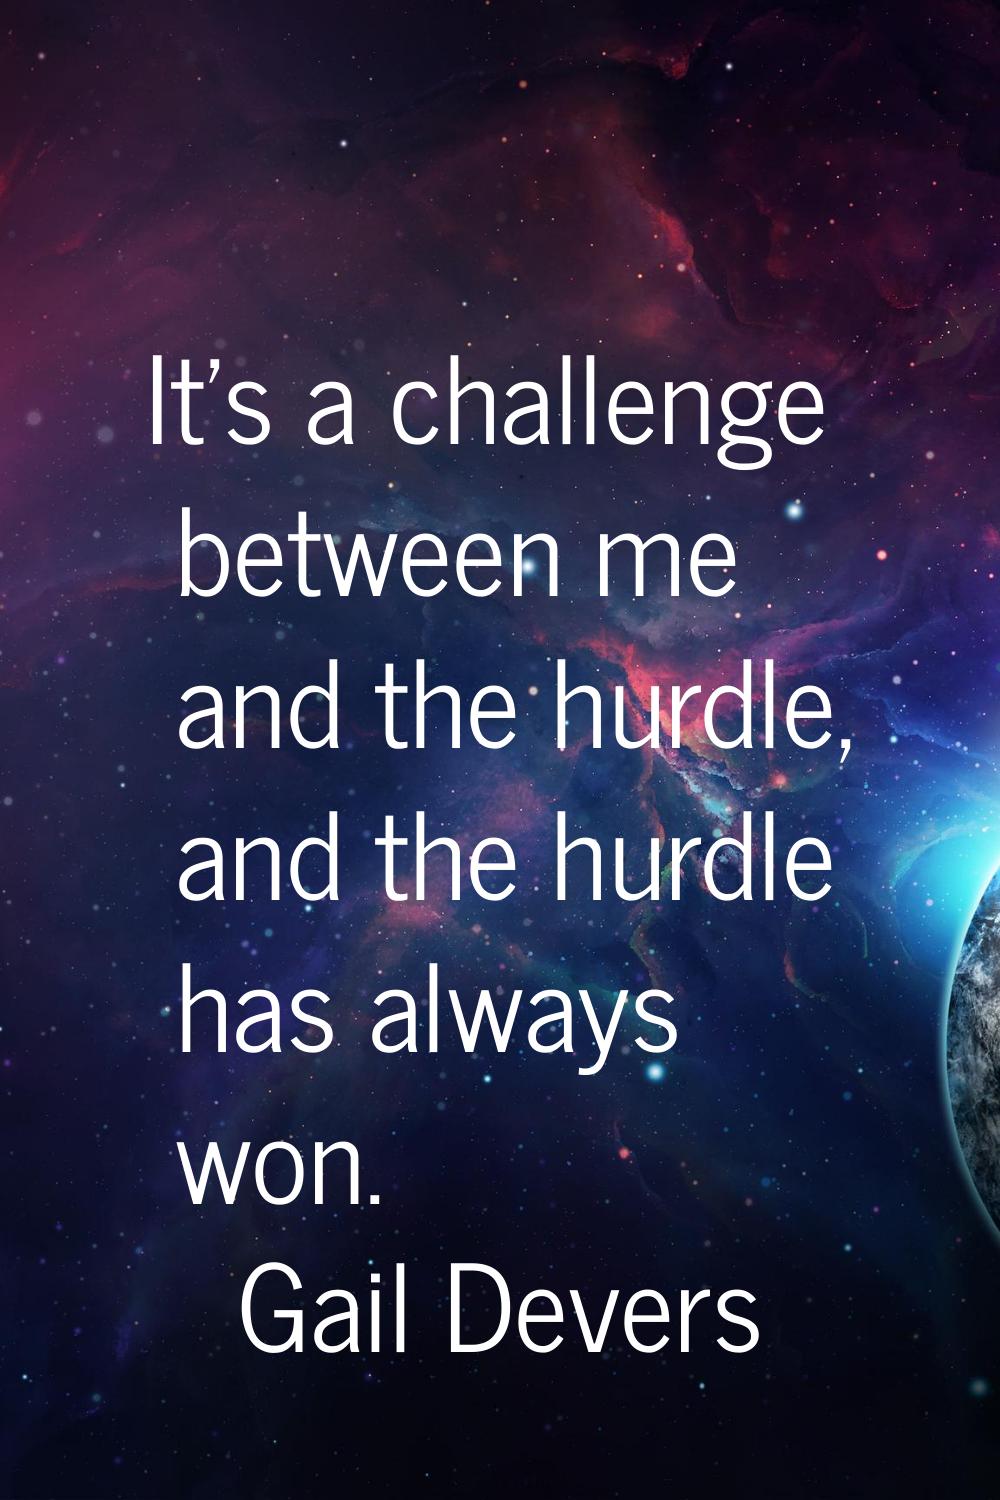 It's a challenge between me and the hurdle, and the hurdle has always won.